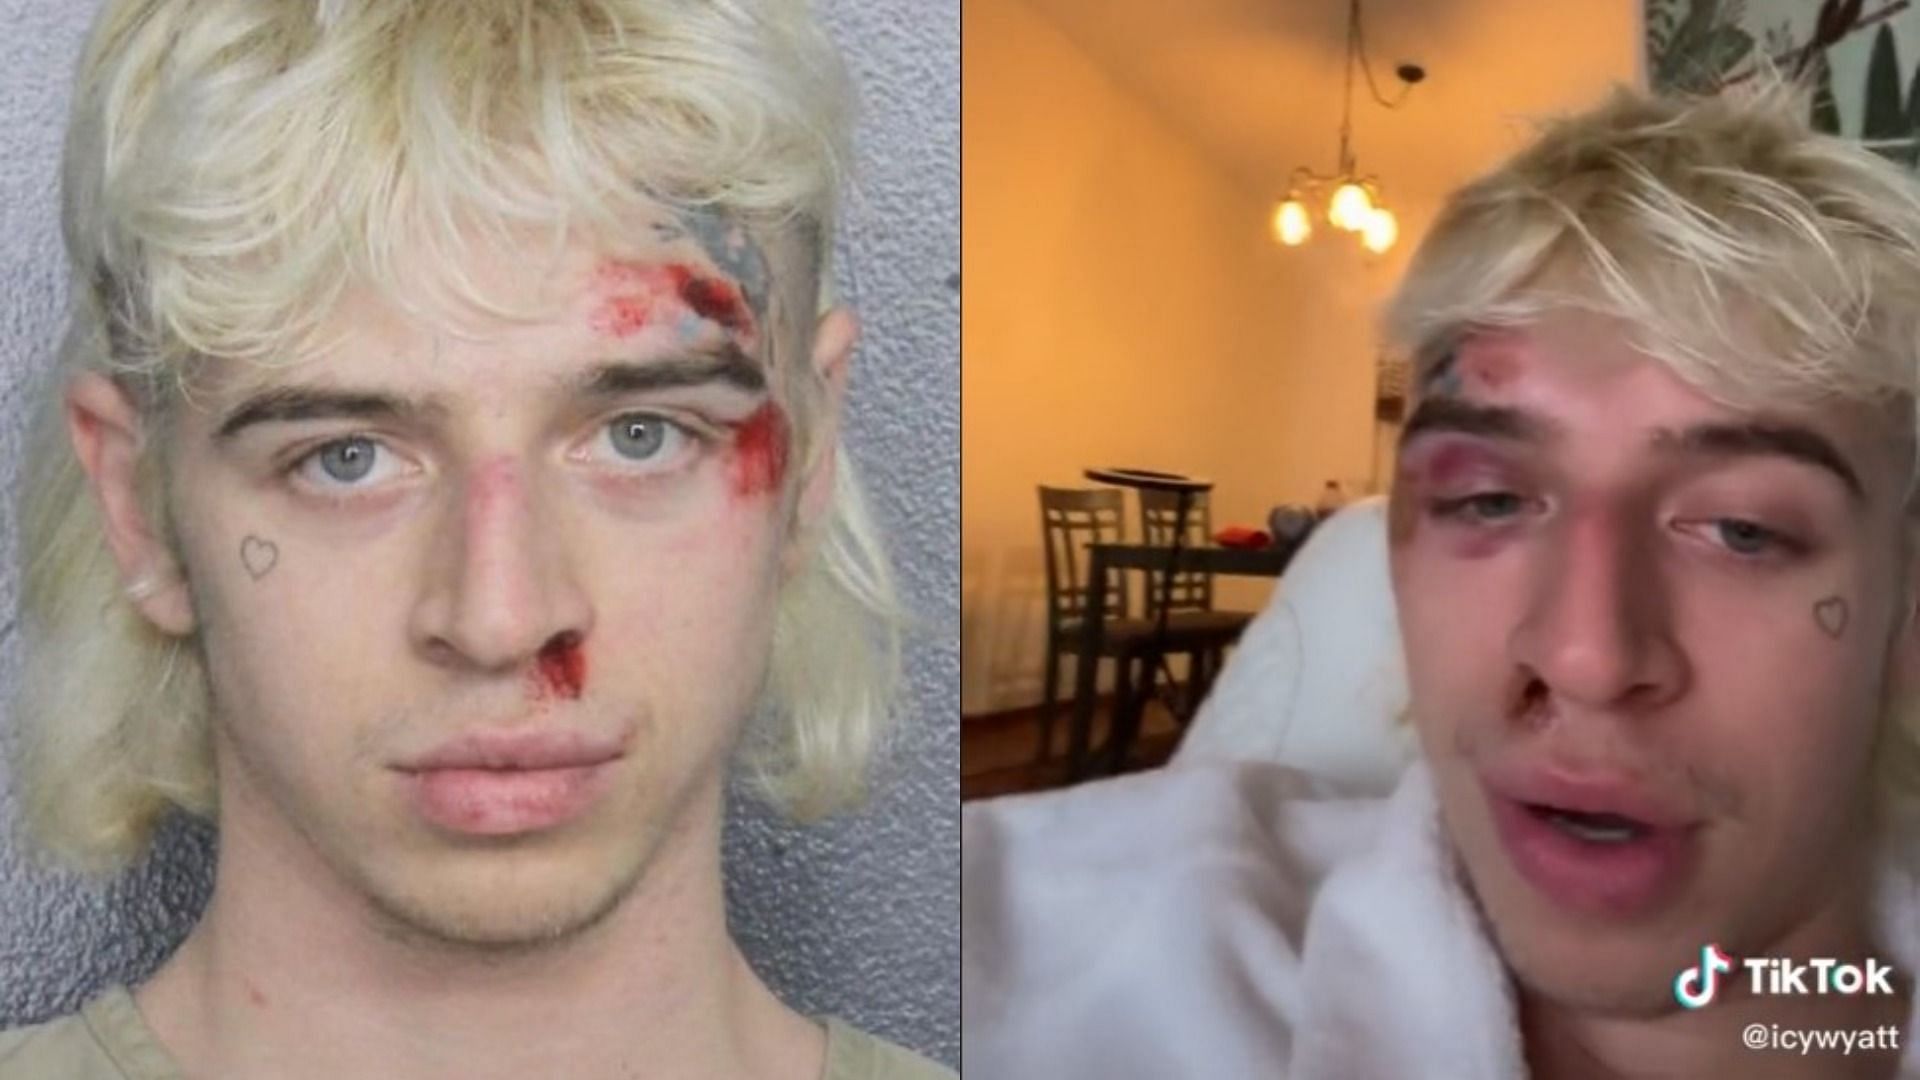 Icy Wyatt got into an altercation with two men in a Chick-Fil-A parking lot (Images via icywyatt/TikTok)